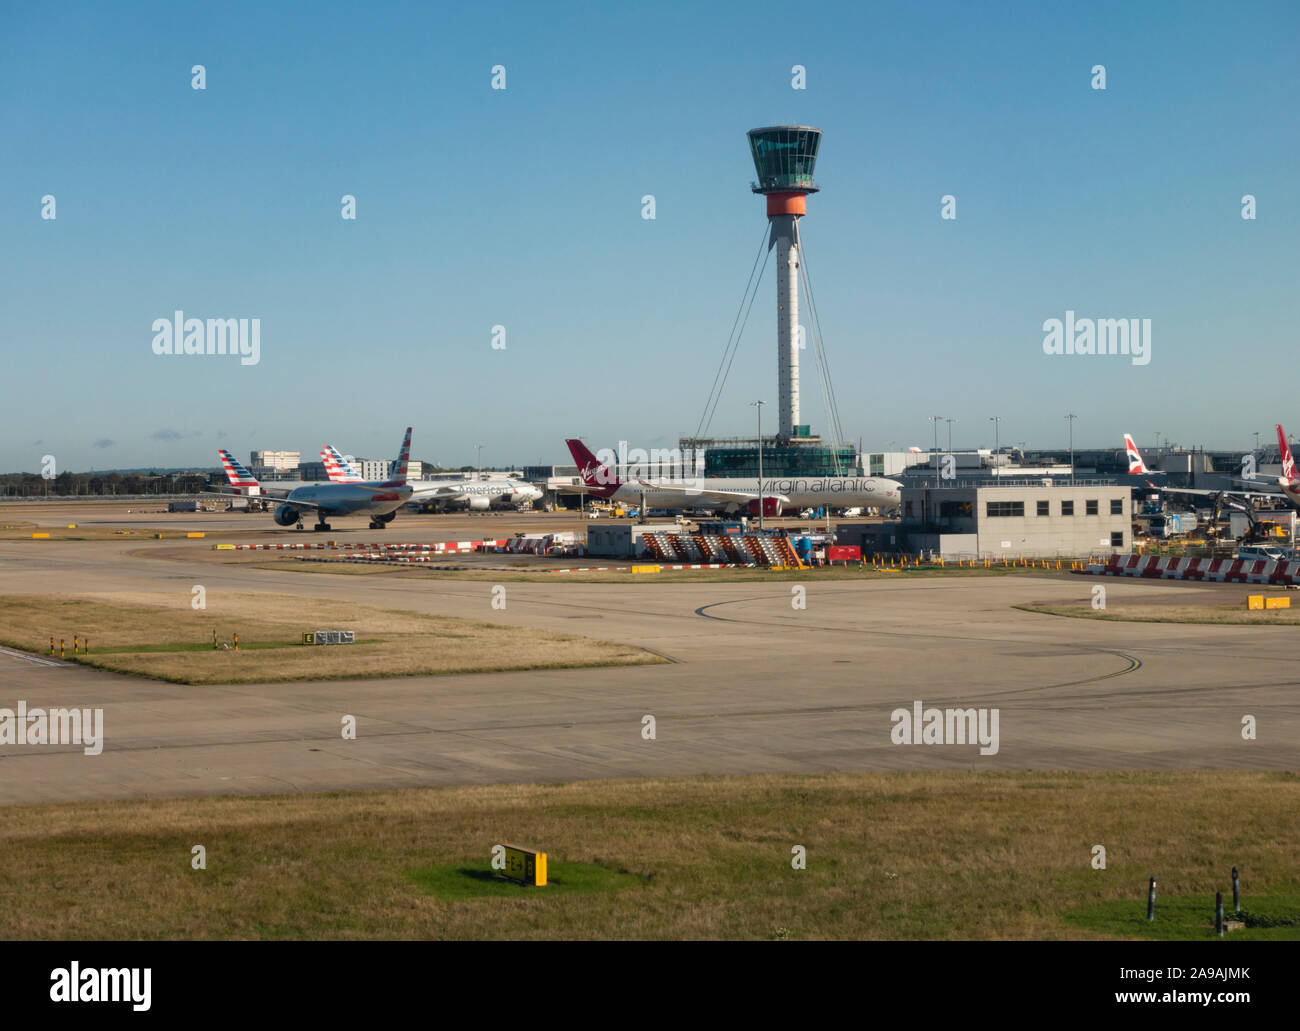 Air traffic control tower and parked aircraft at London Heathrow Airport, England, United Kingdom Stock Photo